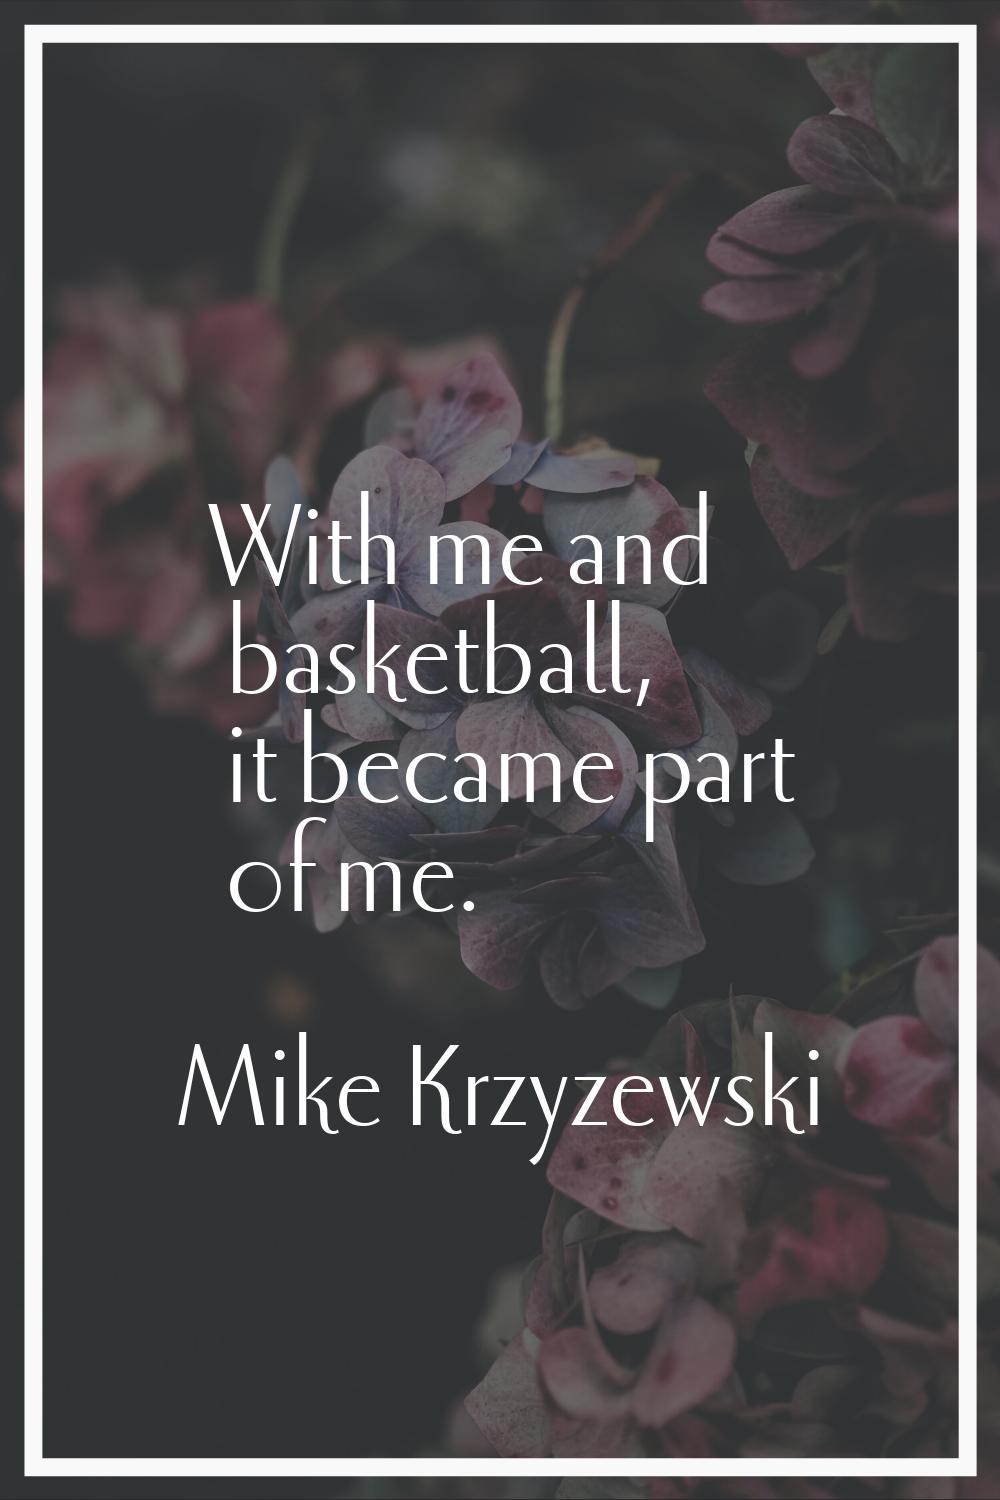 With me and basketball, it became part of me.